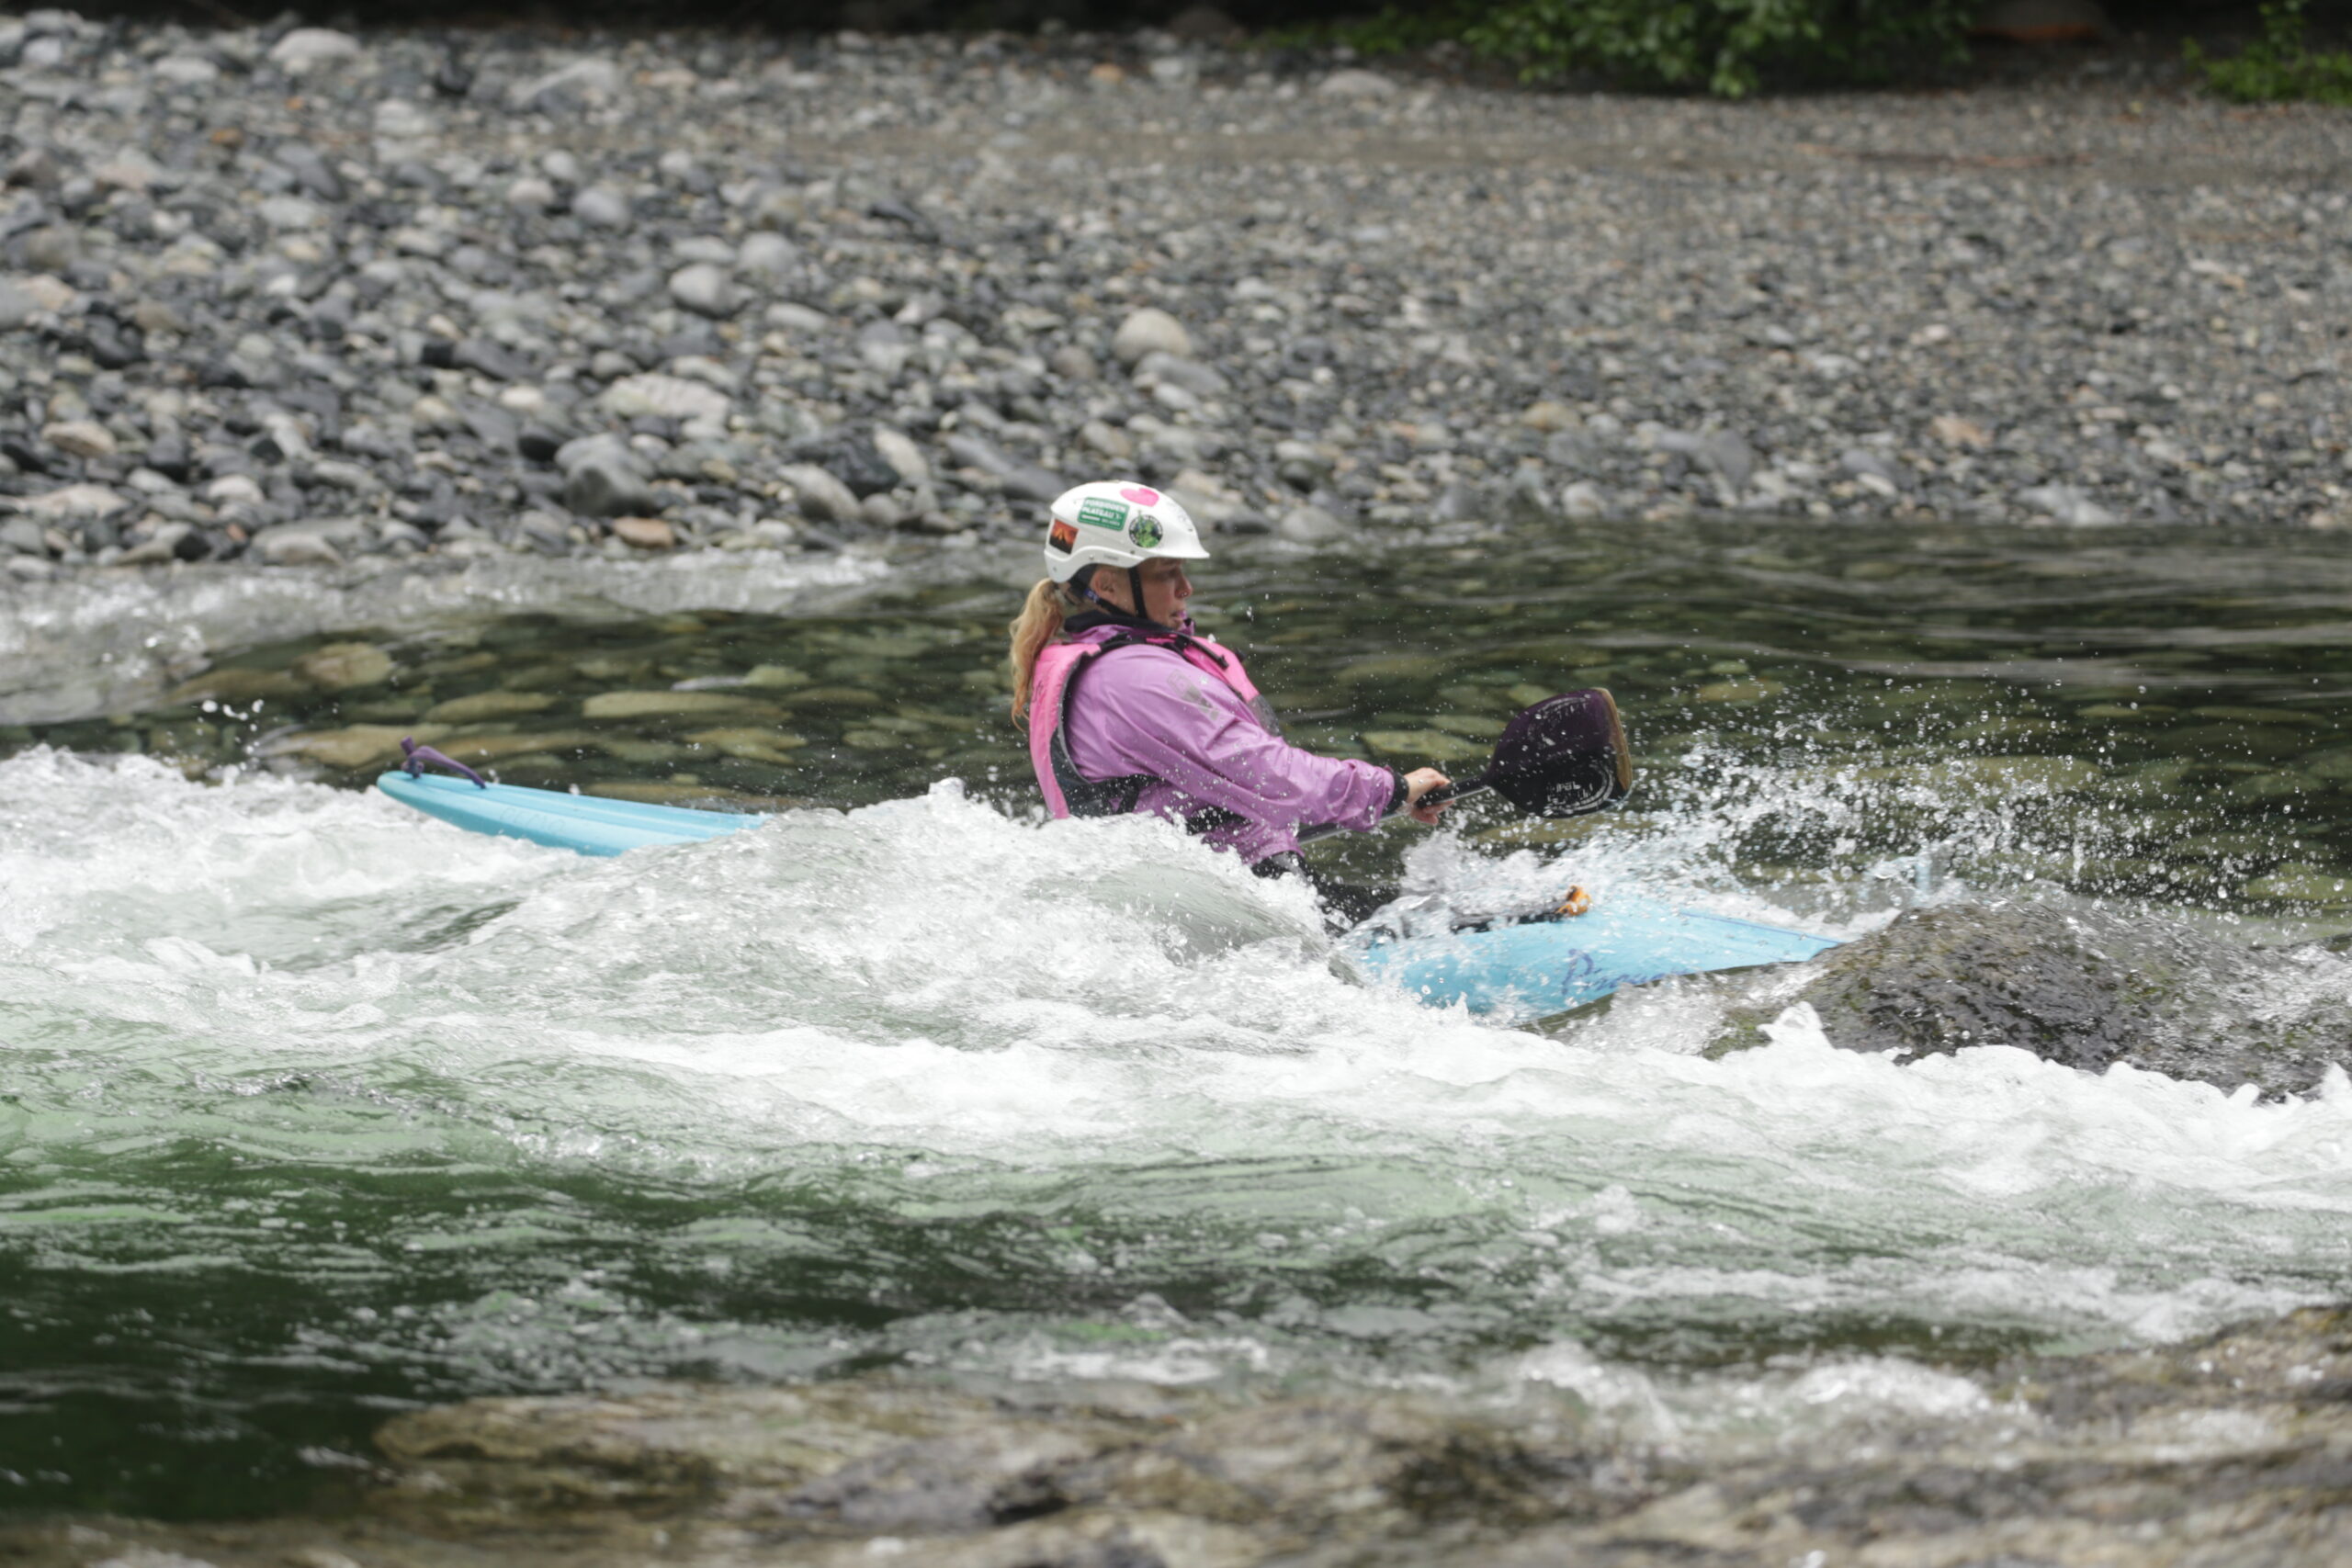 surfing a wave on the Gold River